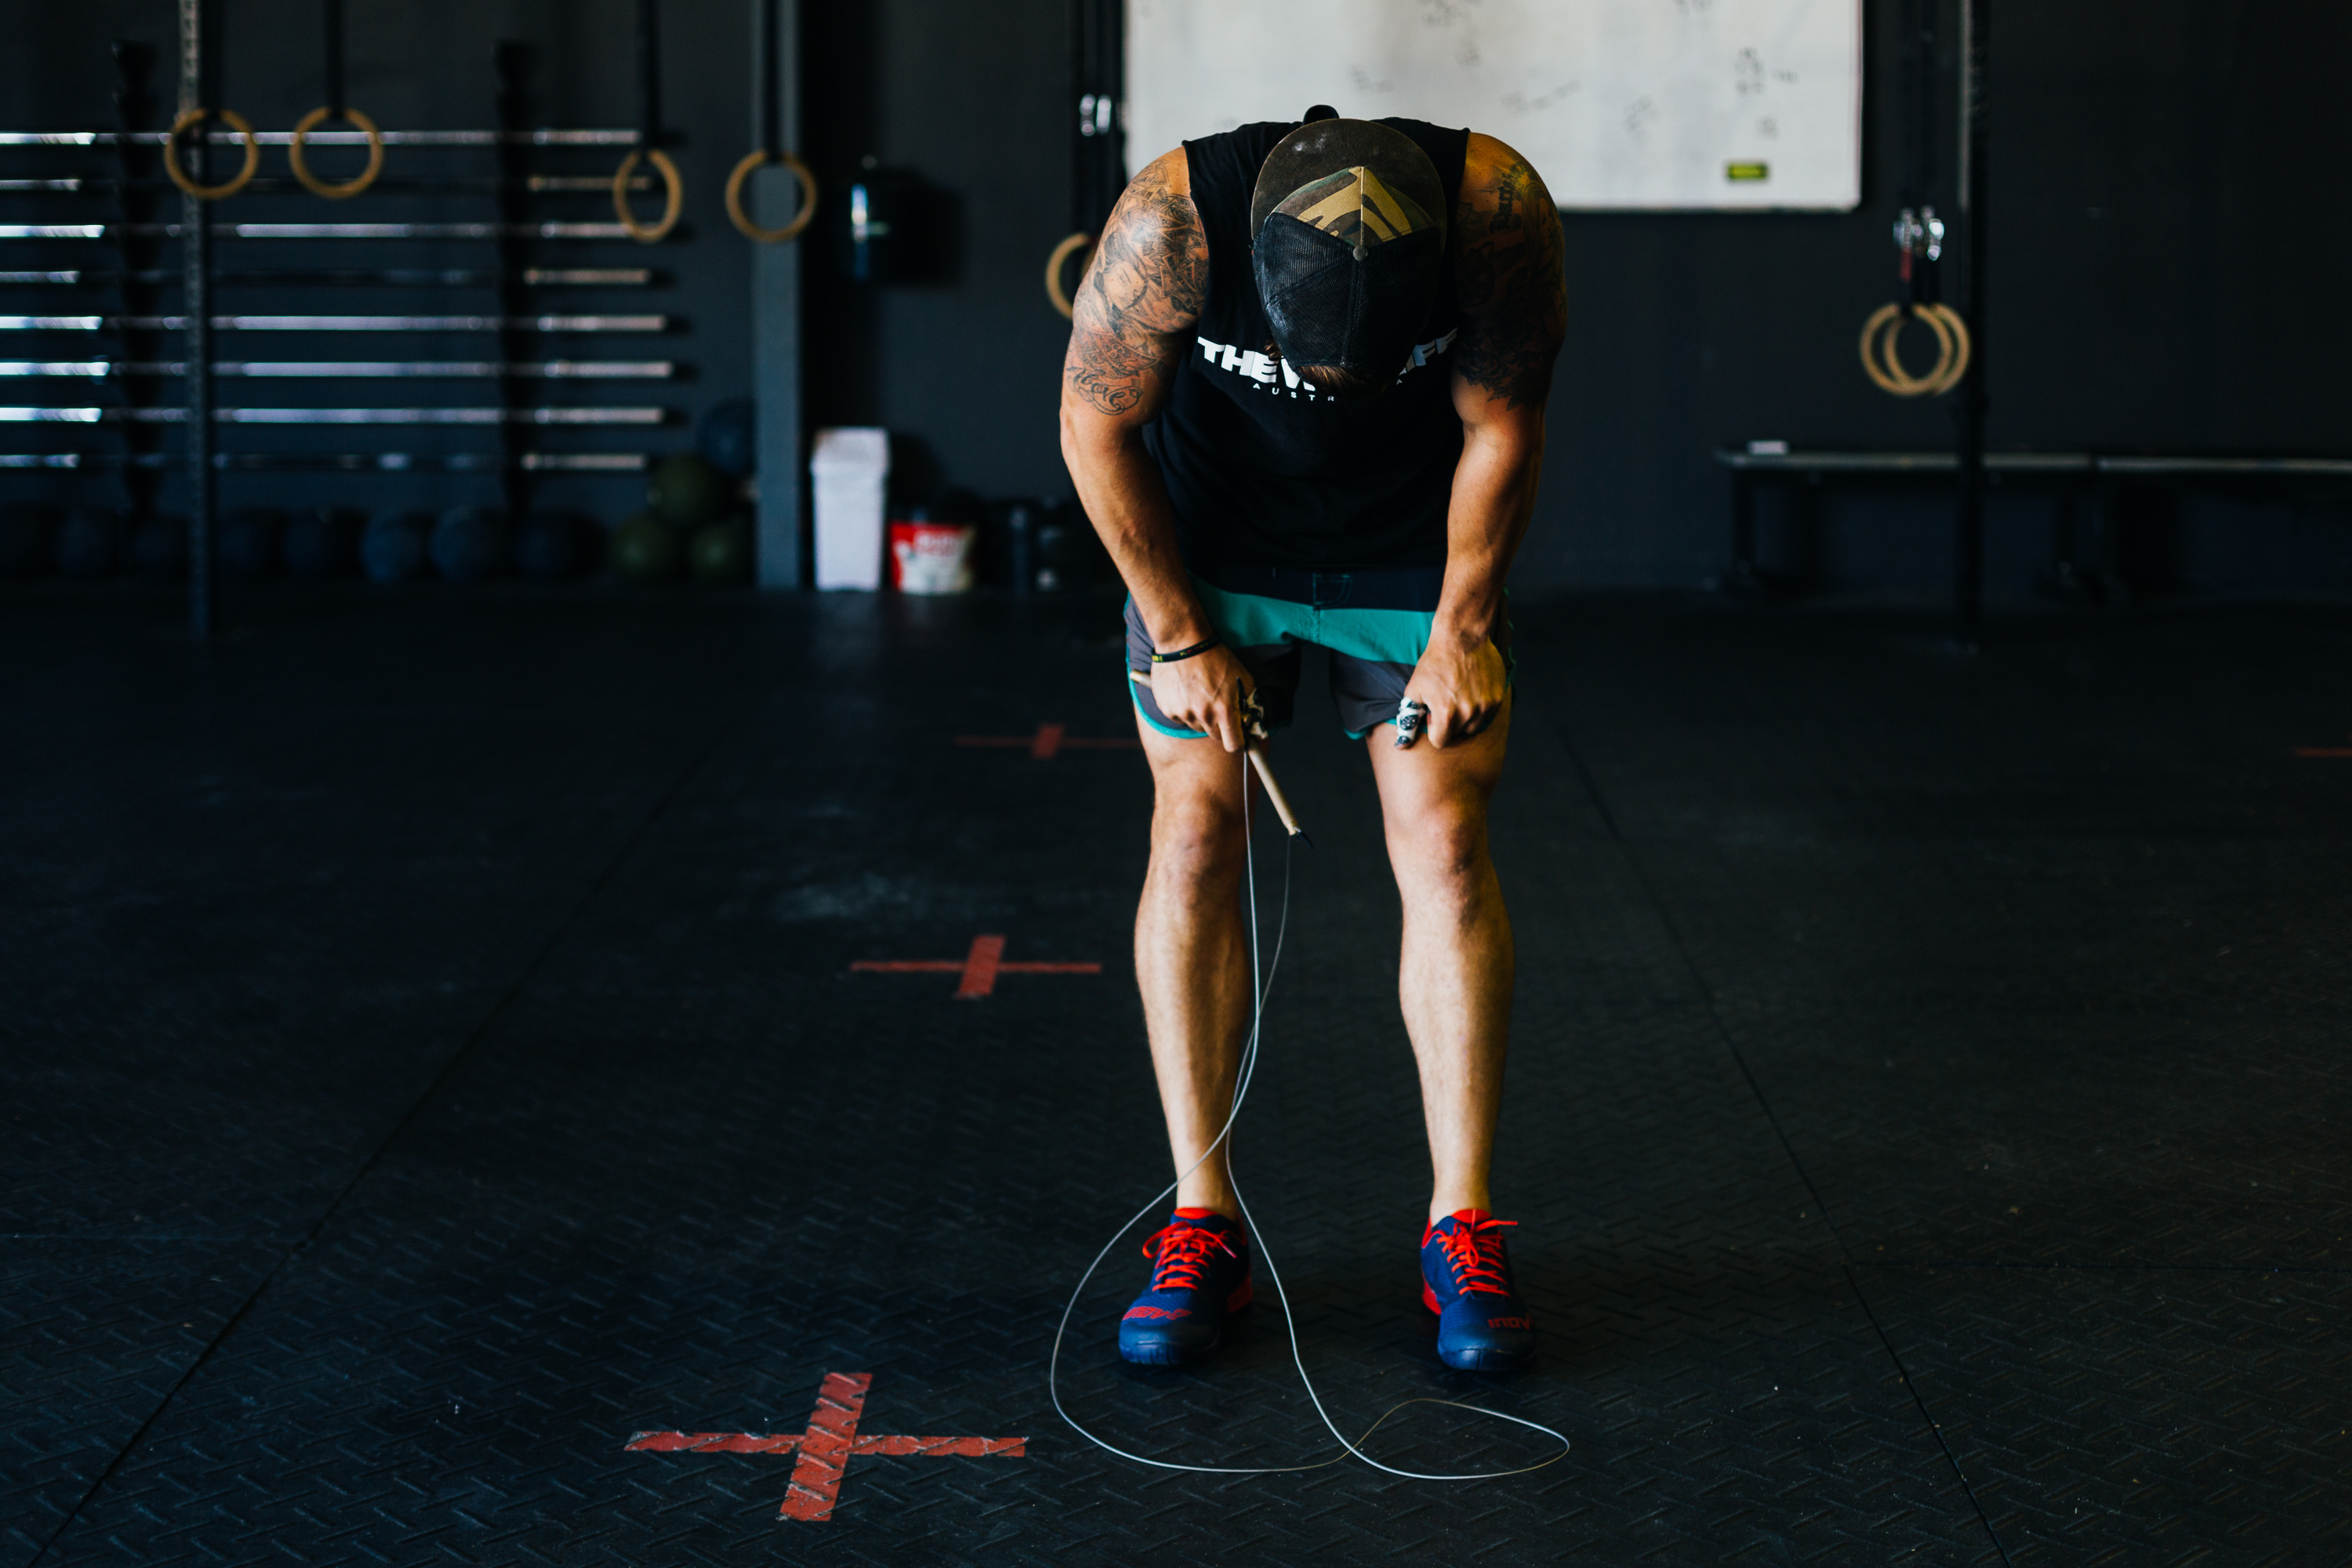 How to Do Box Jumps in 5 Steps - The WOD Life